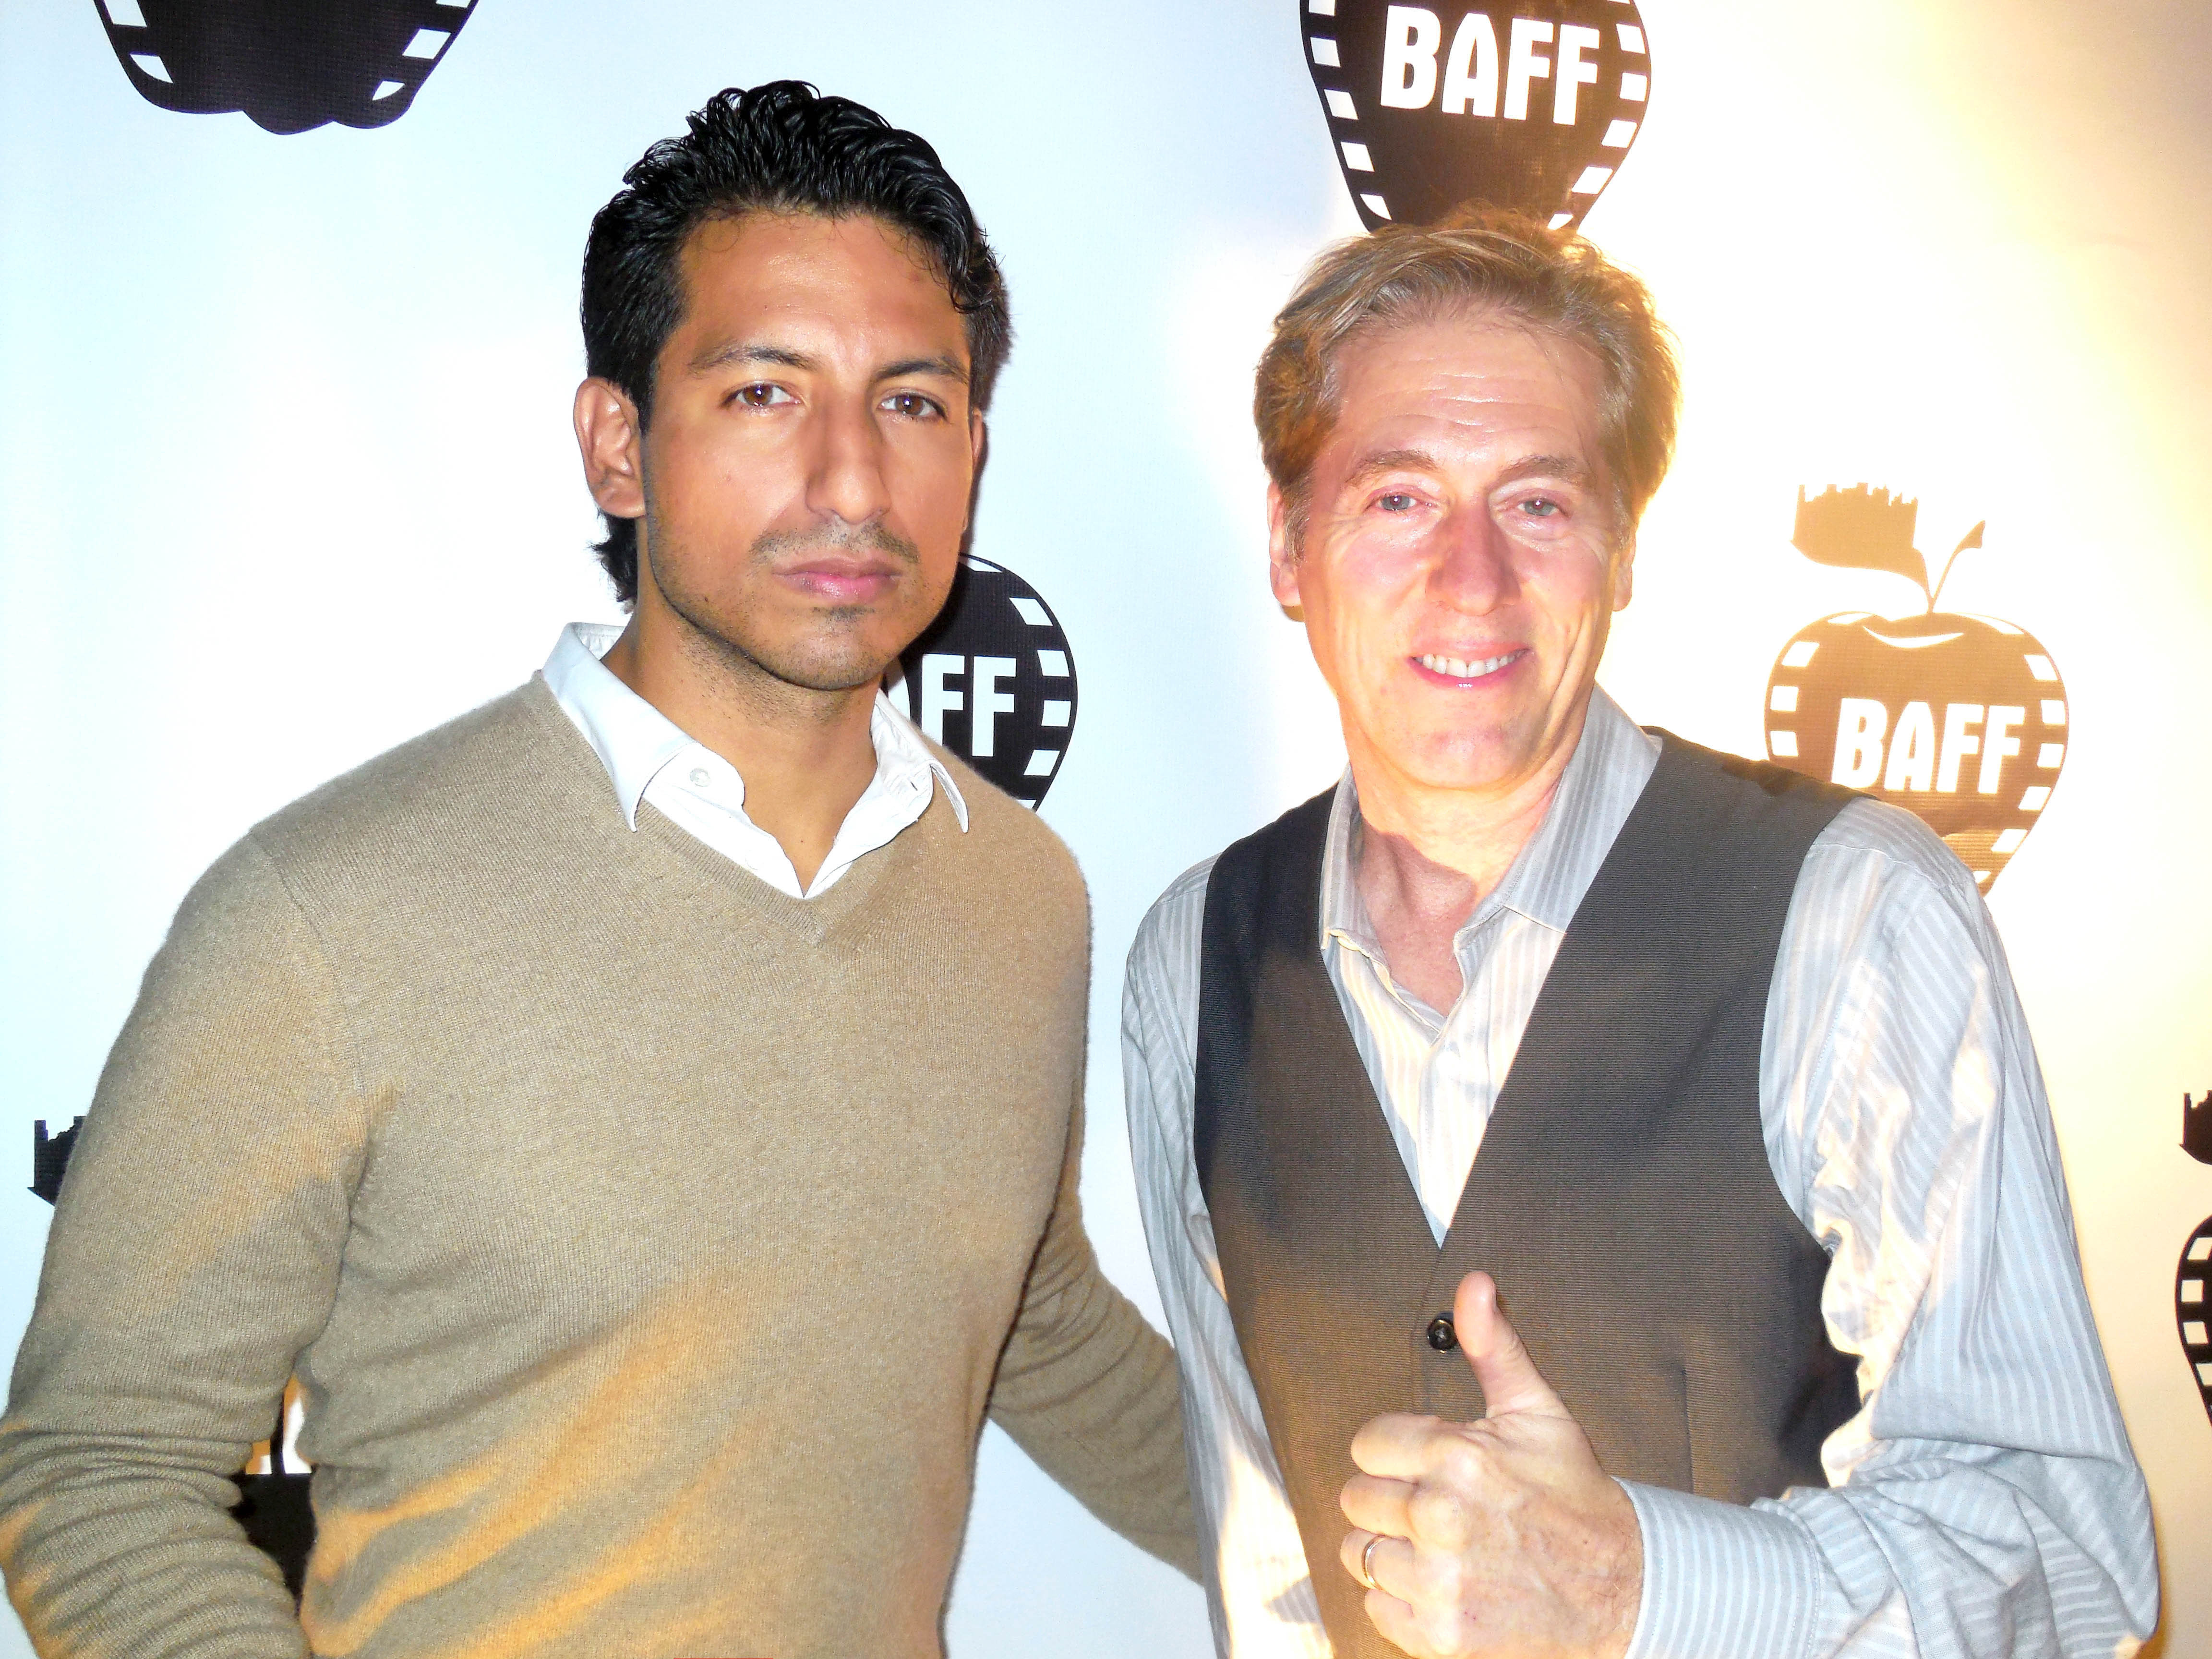 Alex Kruz and Allen Enlow at the Premiere of The Safe Room at the Big Apple Film Festival at TriBeca Cinemas, New York, USA